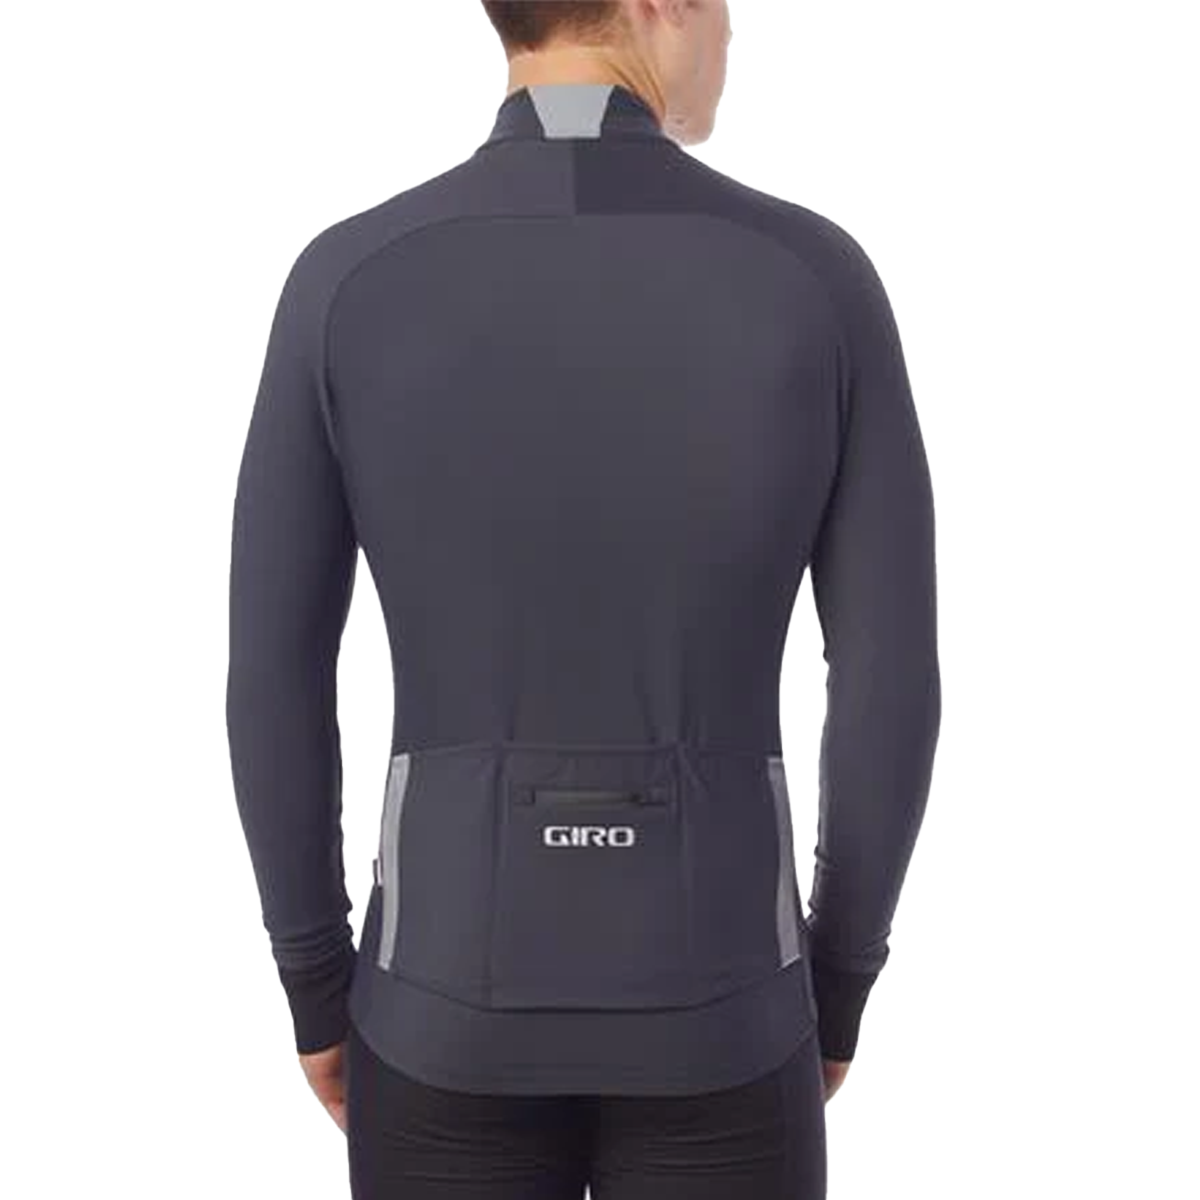 Chrono Thermal Long Sleeve Jersey alternate view